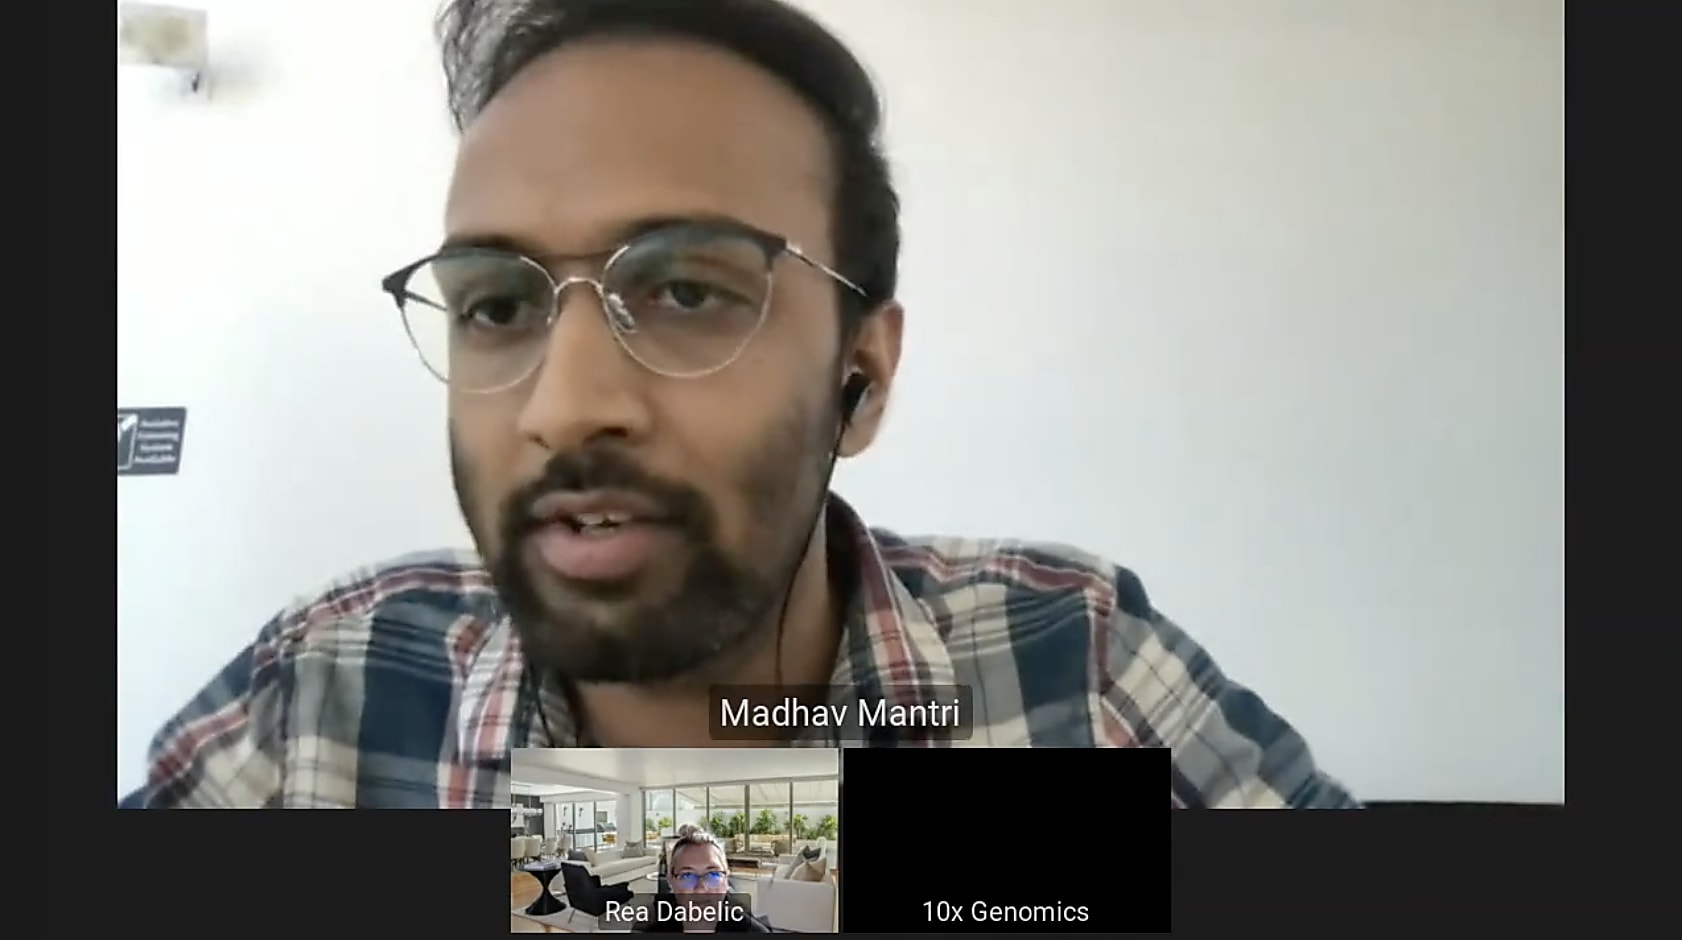 Screenshot from webinar, featuring Madhav Mantri, PhD candidate at Cornell University, and Rea Dabelic, PhD, Sr. Market Development Manager for Immunology, 10x Genomics.